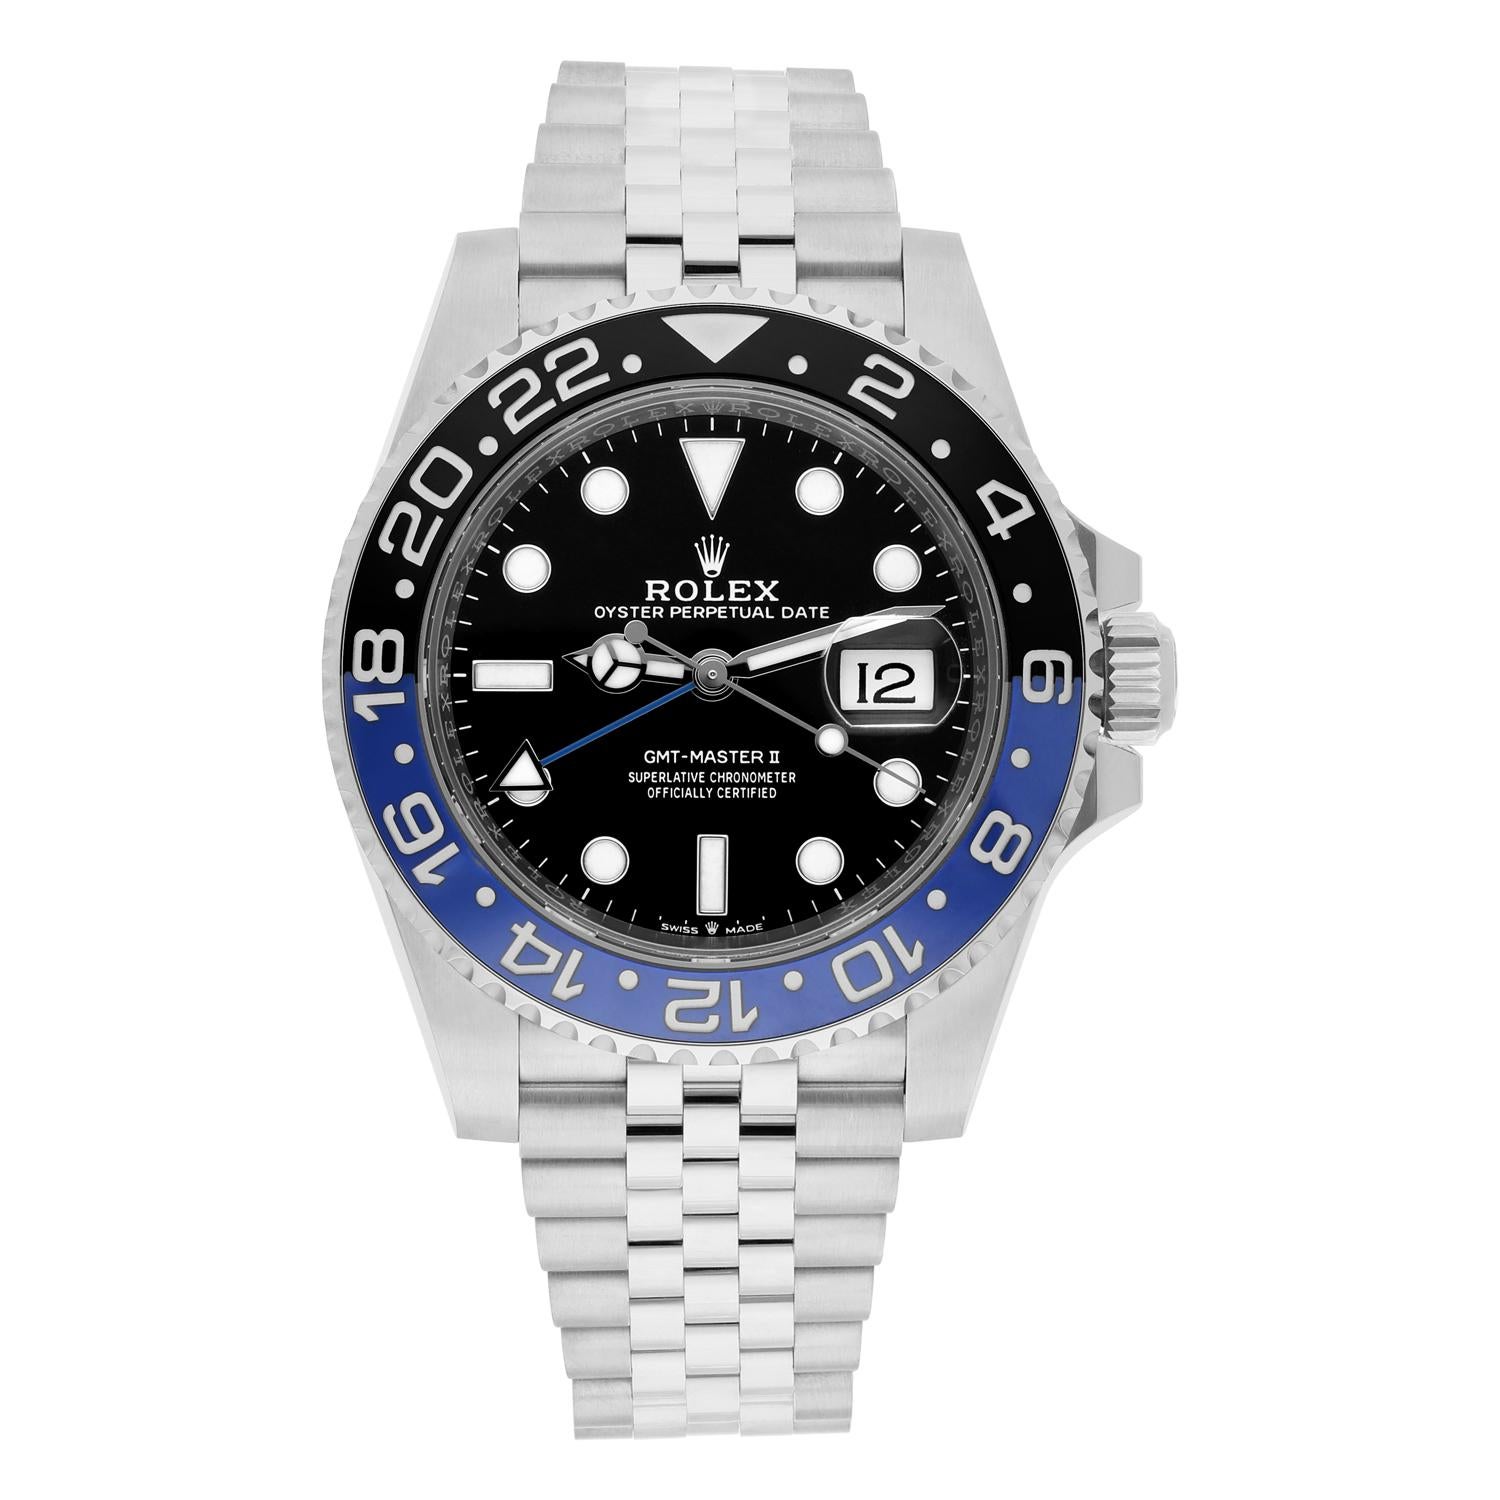 Introducing the Rolex GMT-Master II 126710BLNR wristwatch, featuring a 40mm stainless steel case with a bidirectional rotating GMT bezel in blue and black. The black dial boasts luminous hands and indexes, as well as a date indicator. The watch is